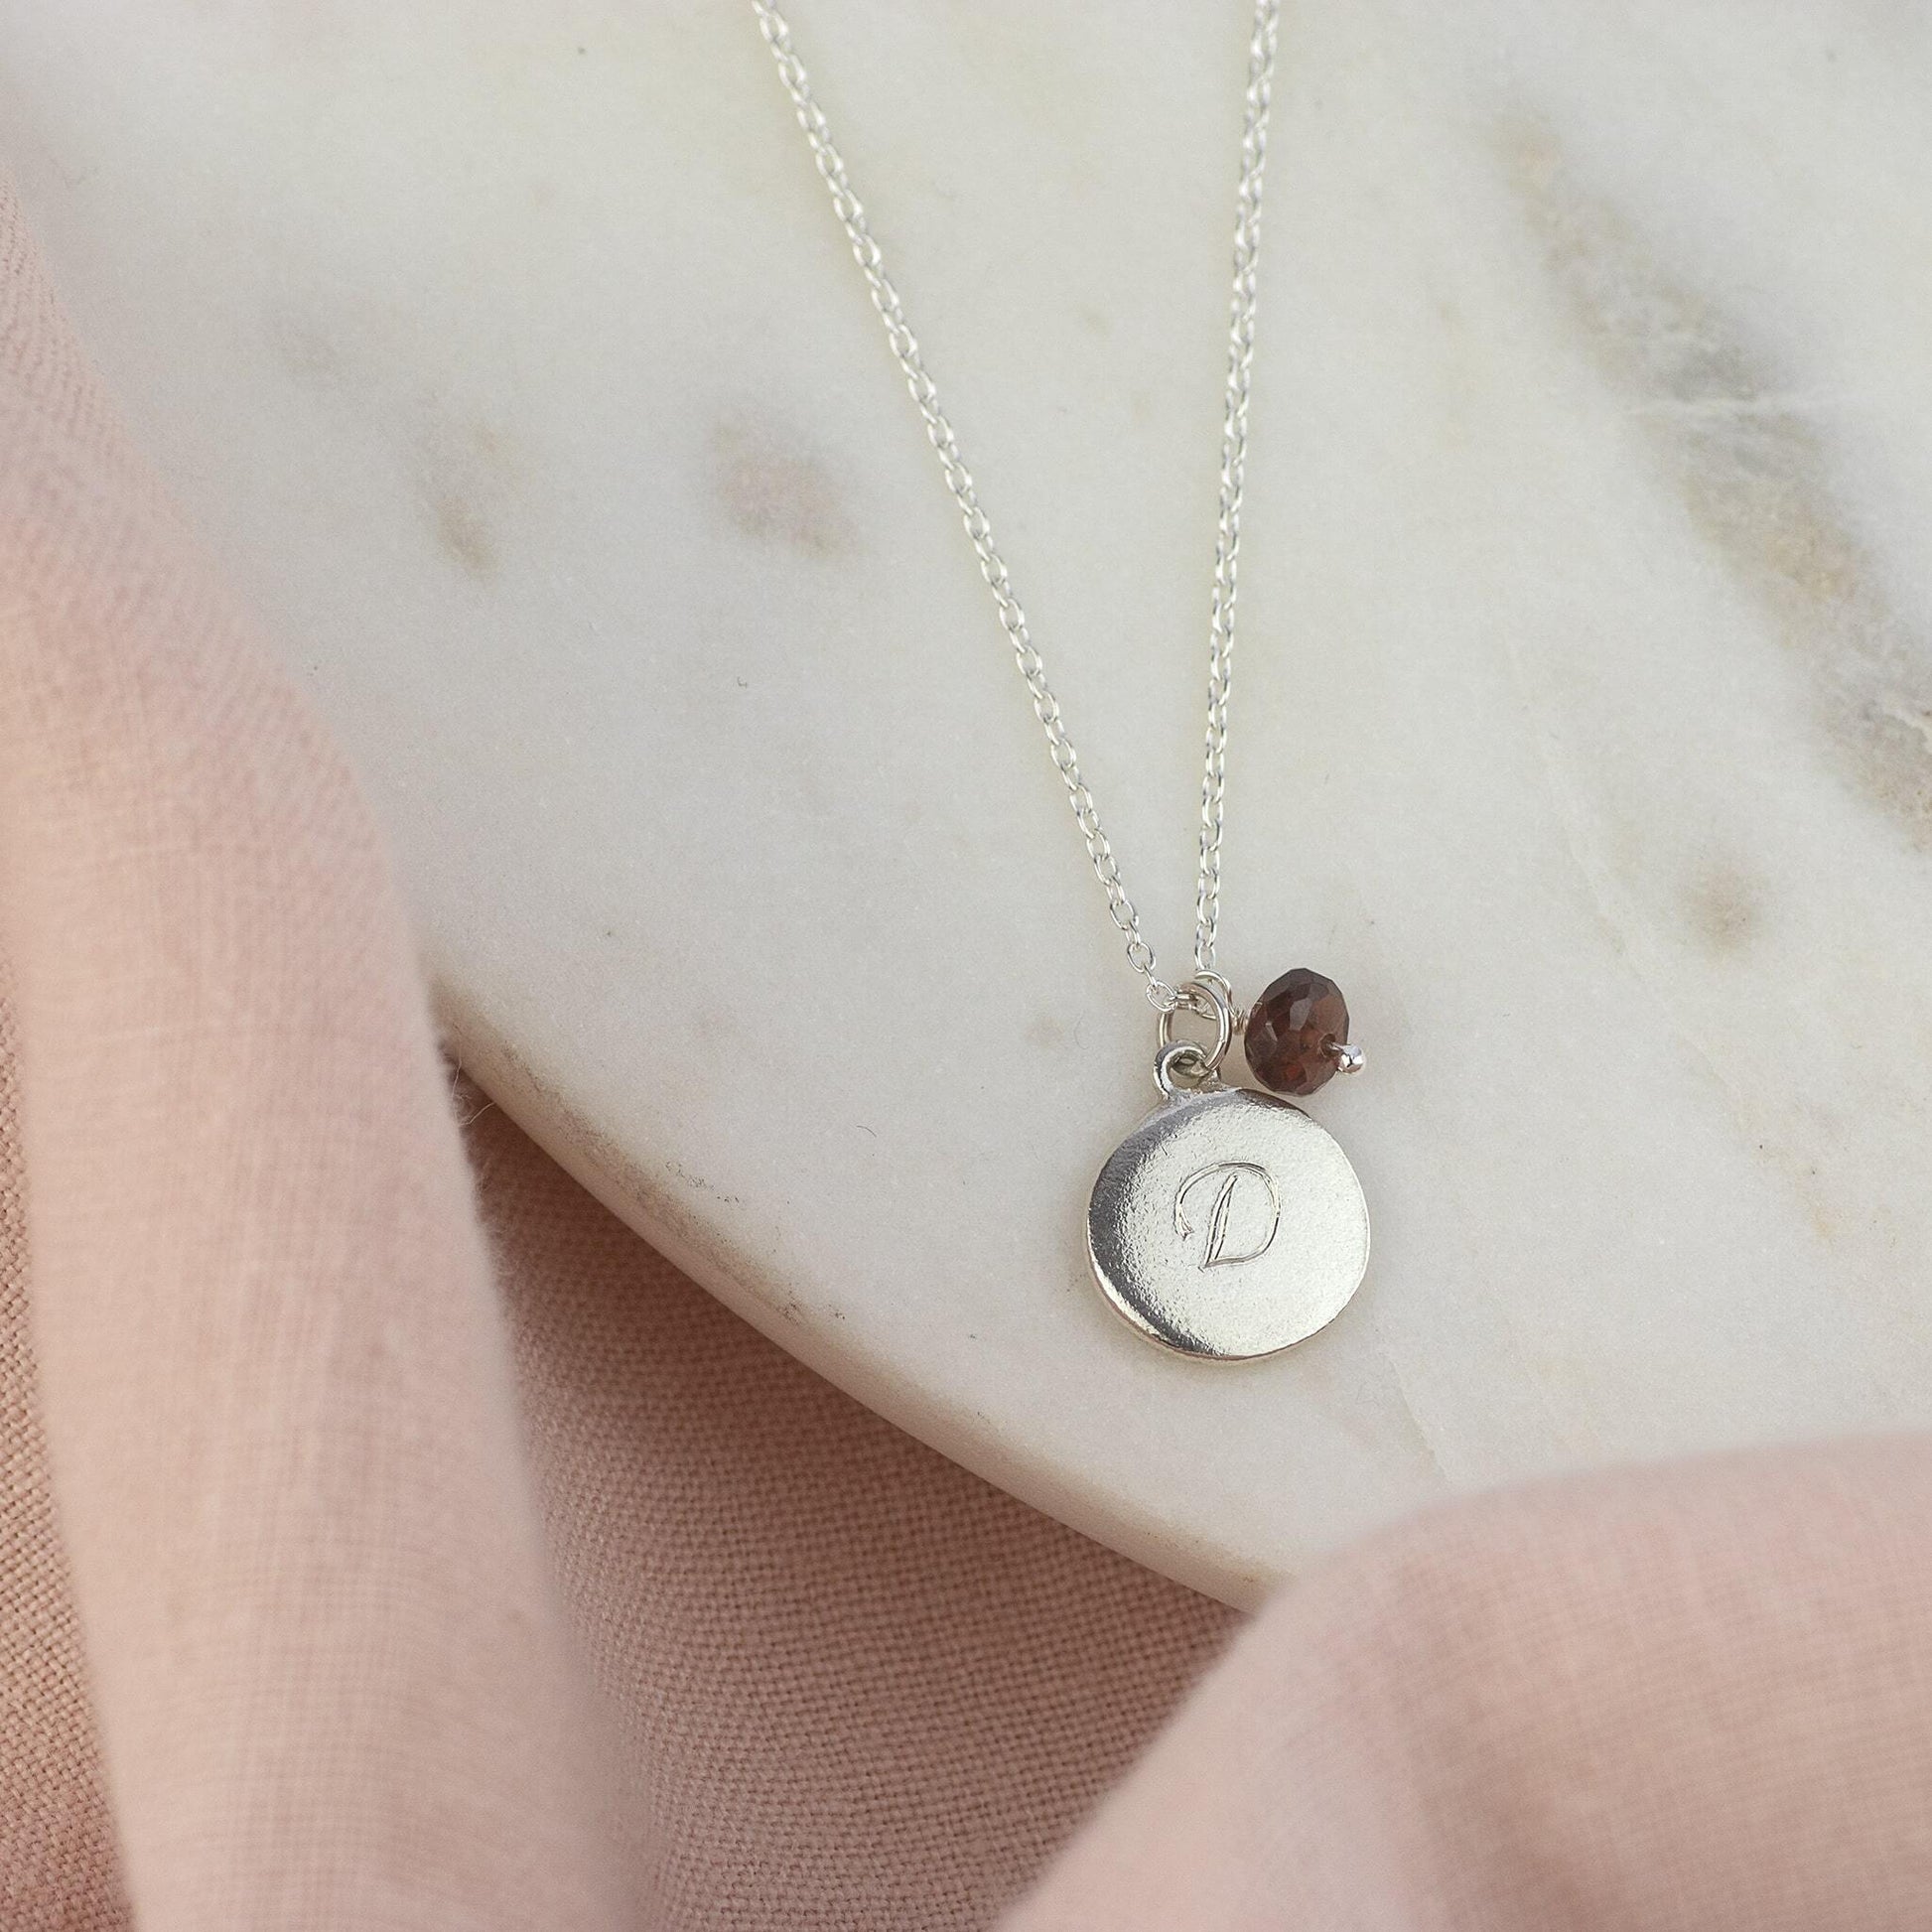 Personalised Initial Pendant with Birthstone